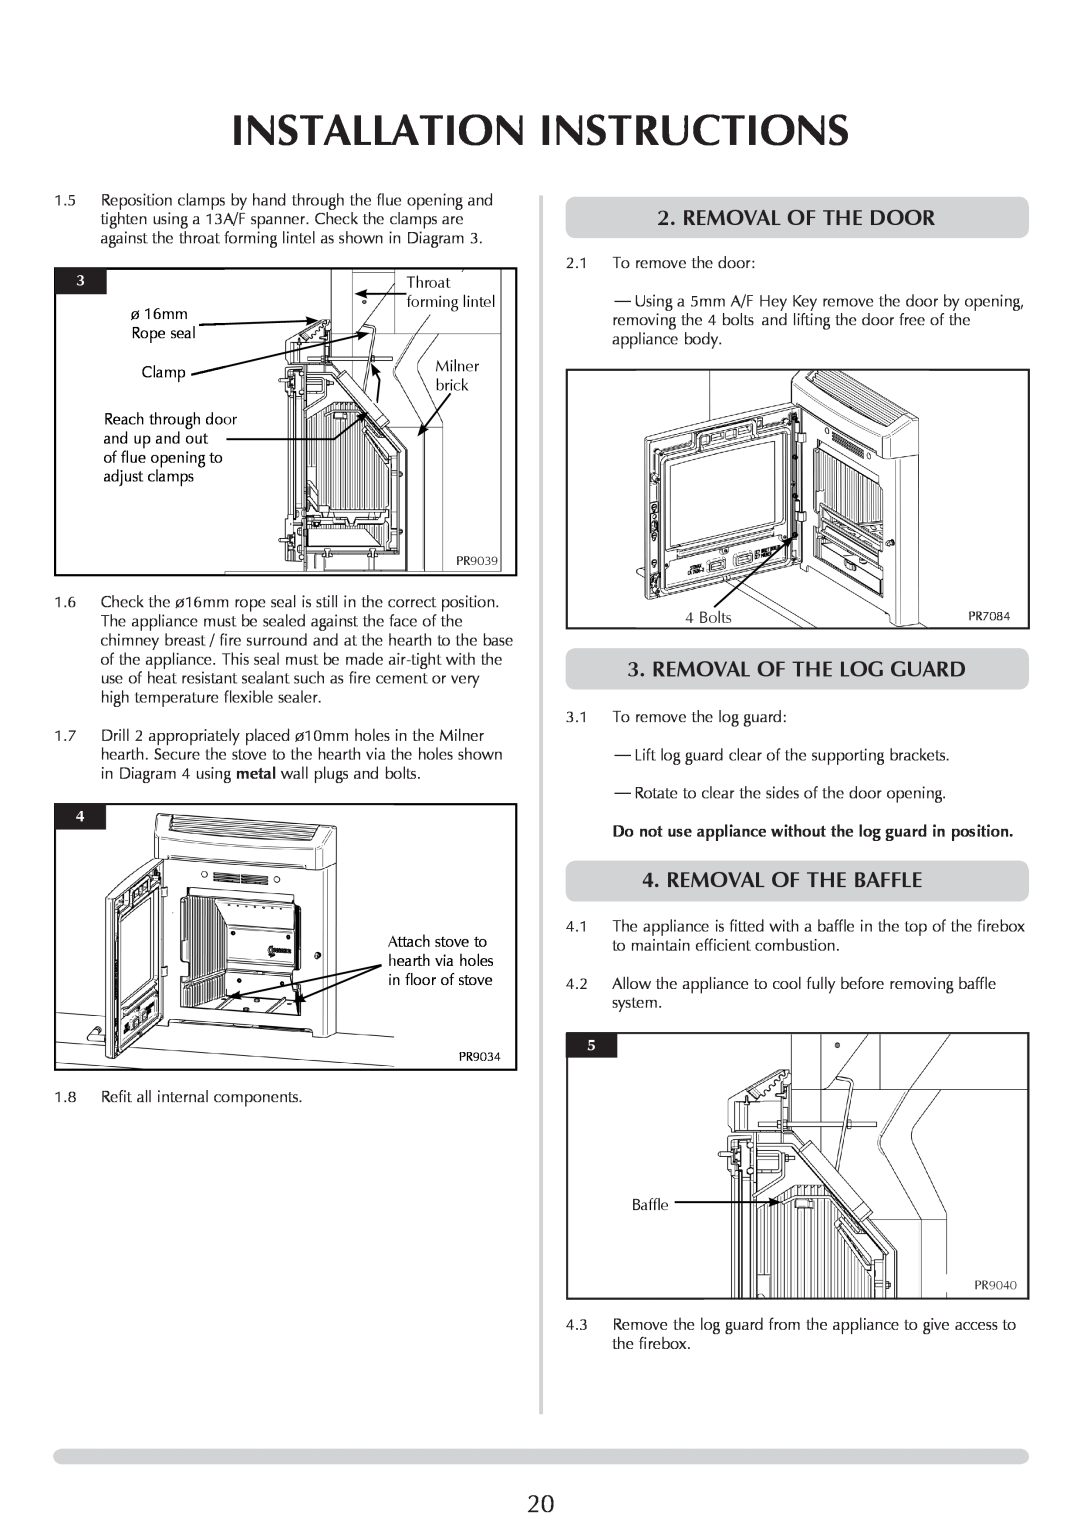 Yeoman YMMB manual REMOVAL OF THE door, Removal Of The Log Guard, REMOVAL OF THE baffle, Installation Instructions 